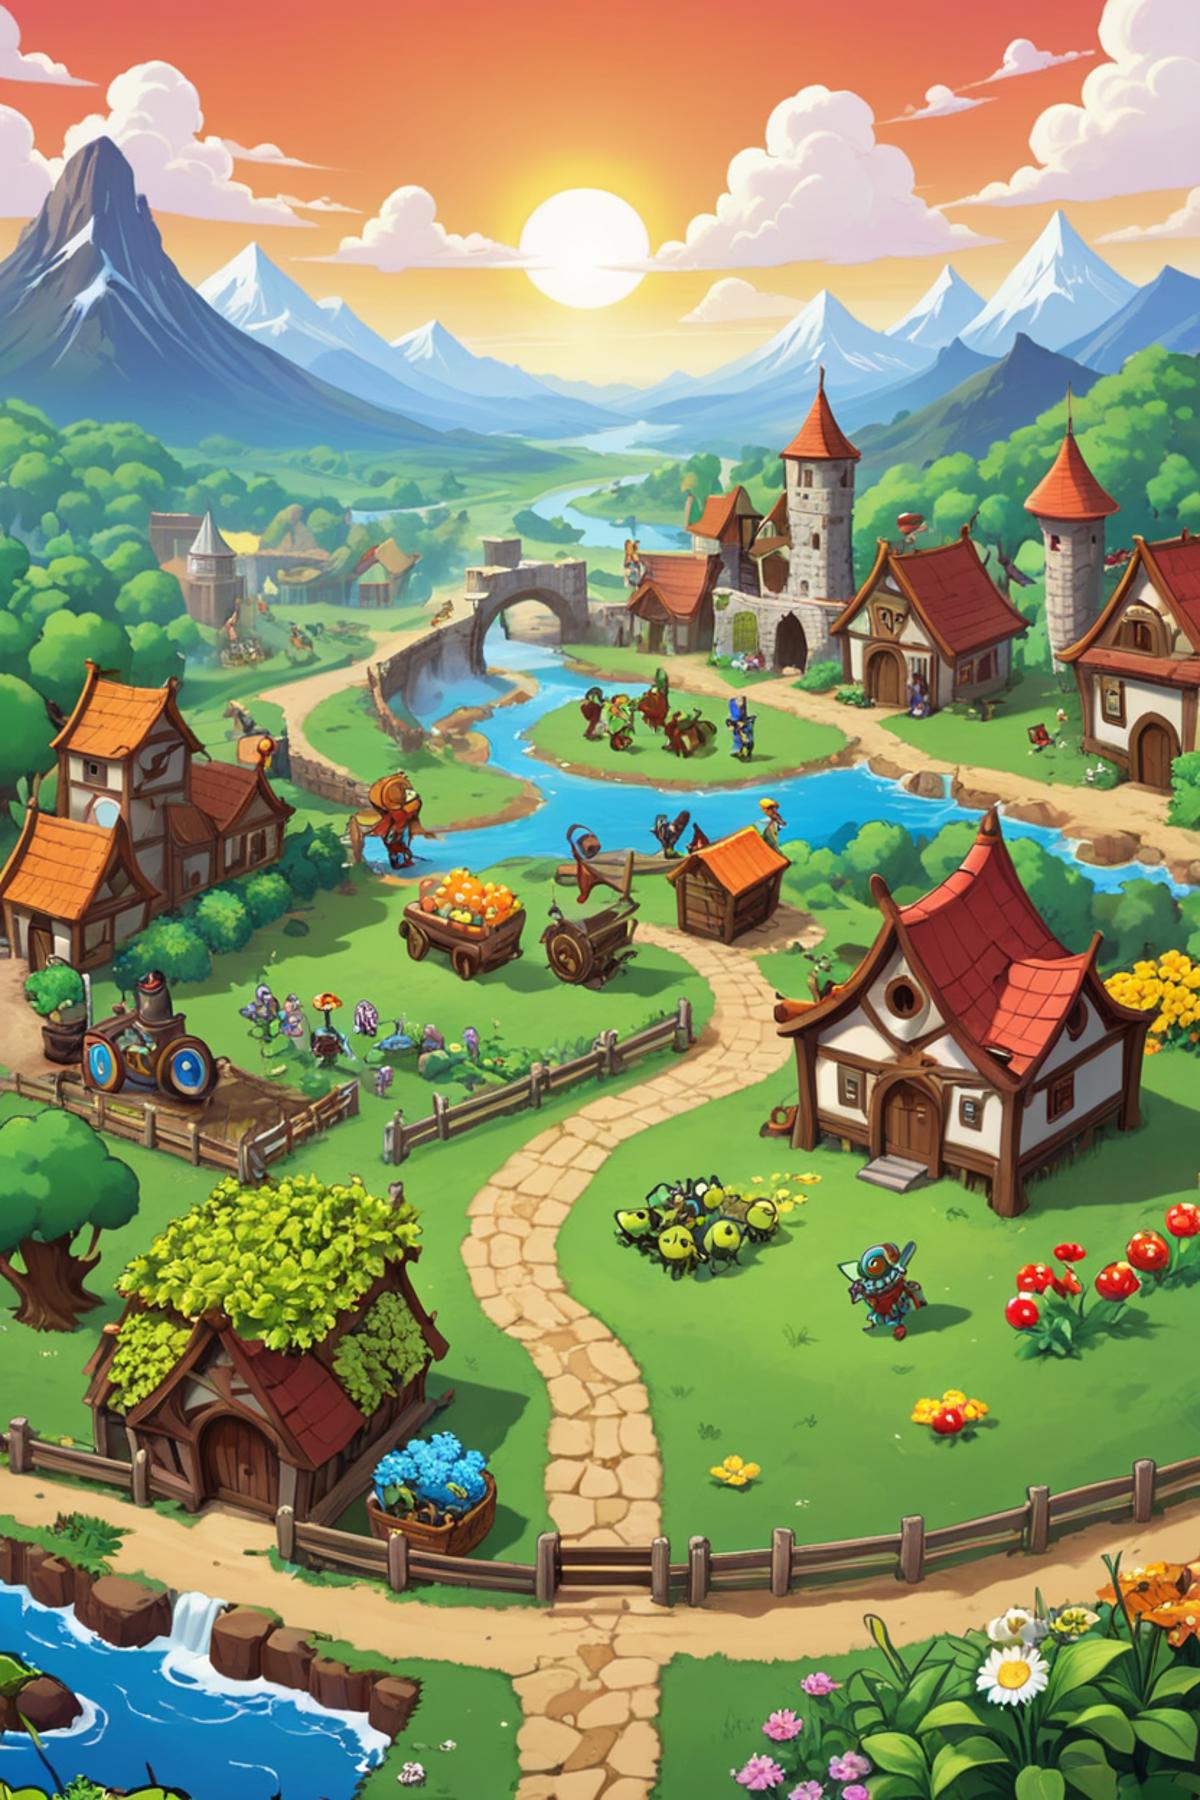 A beautifully colored fantasy scene with a village and a river.